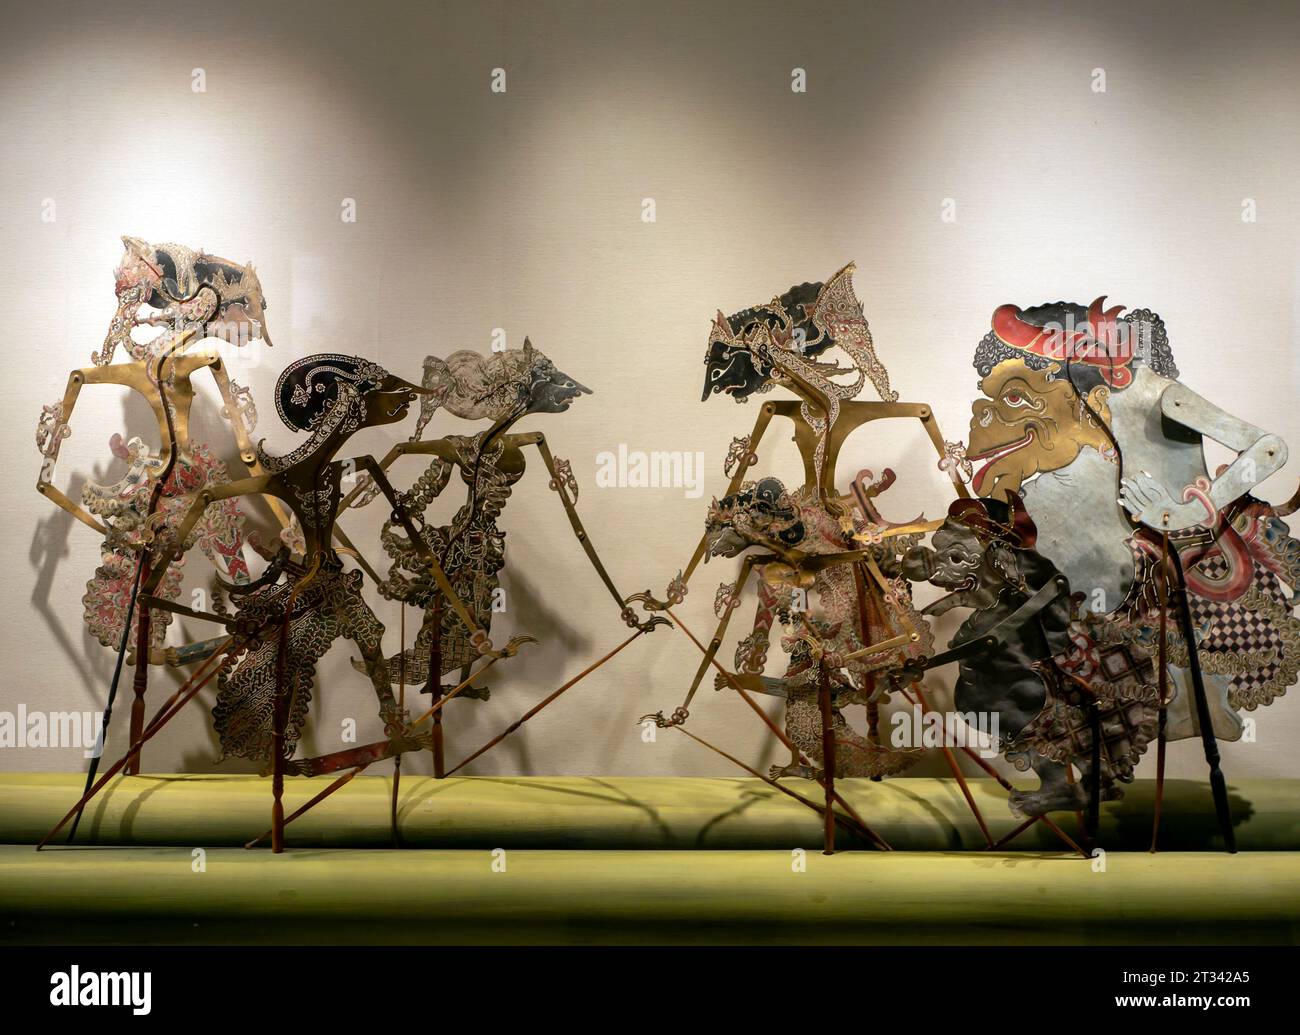 Wayang kulit, shadow puppets,  a traditional javanese art, from Java, Indonesia. Stock Photo